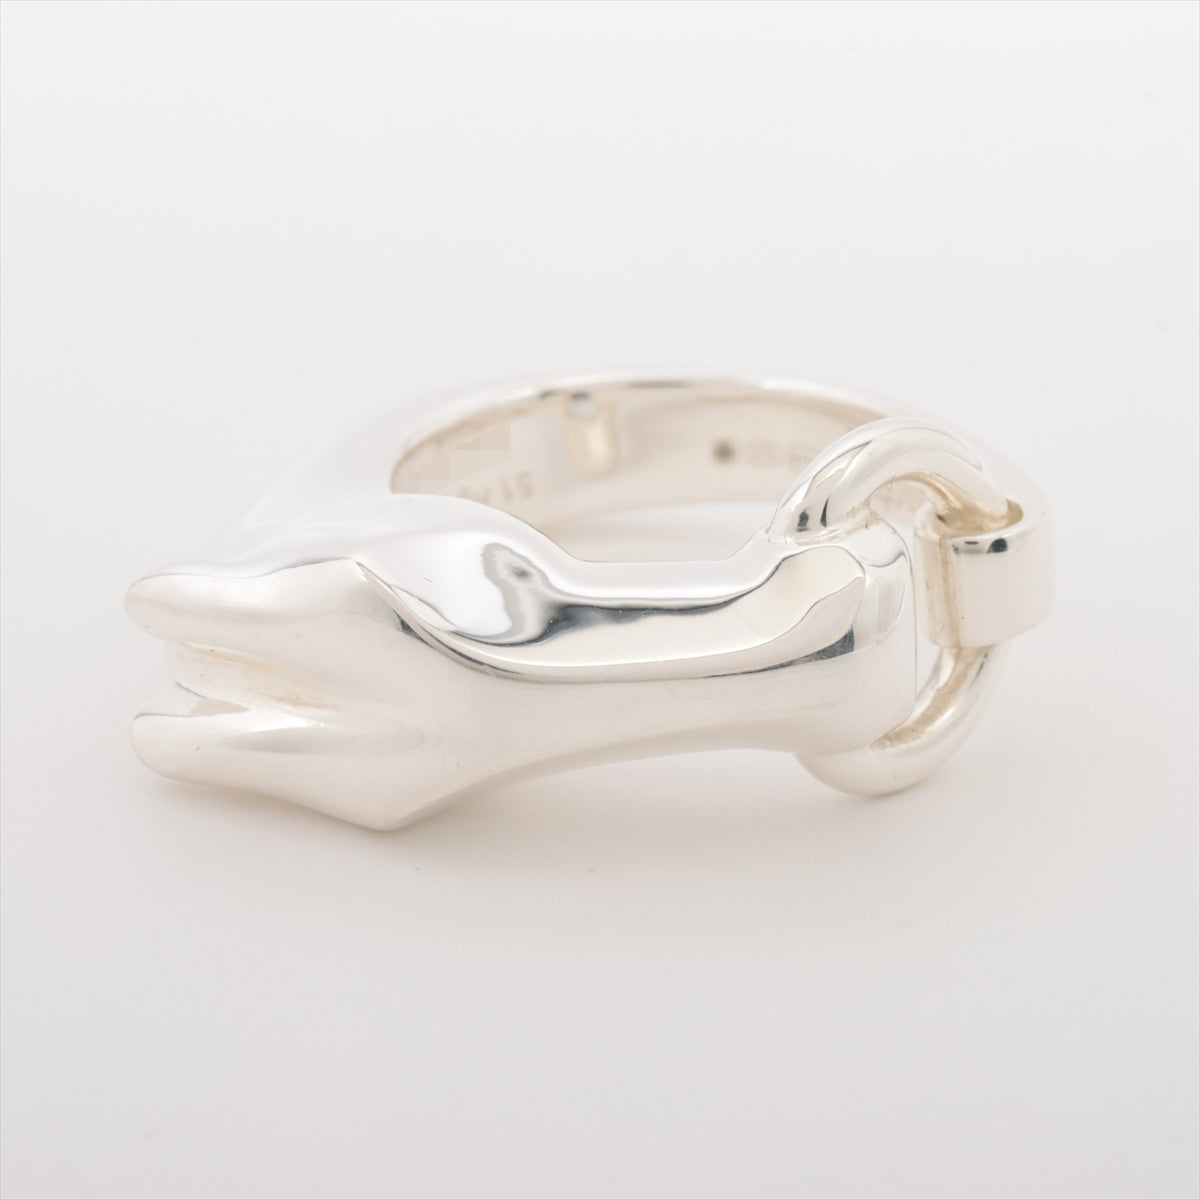 Hermes Galop Ring 51 925 15.4g Silver Ring